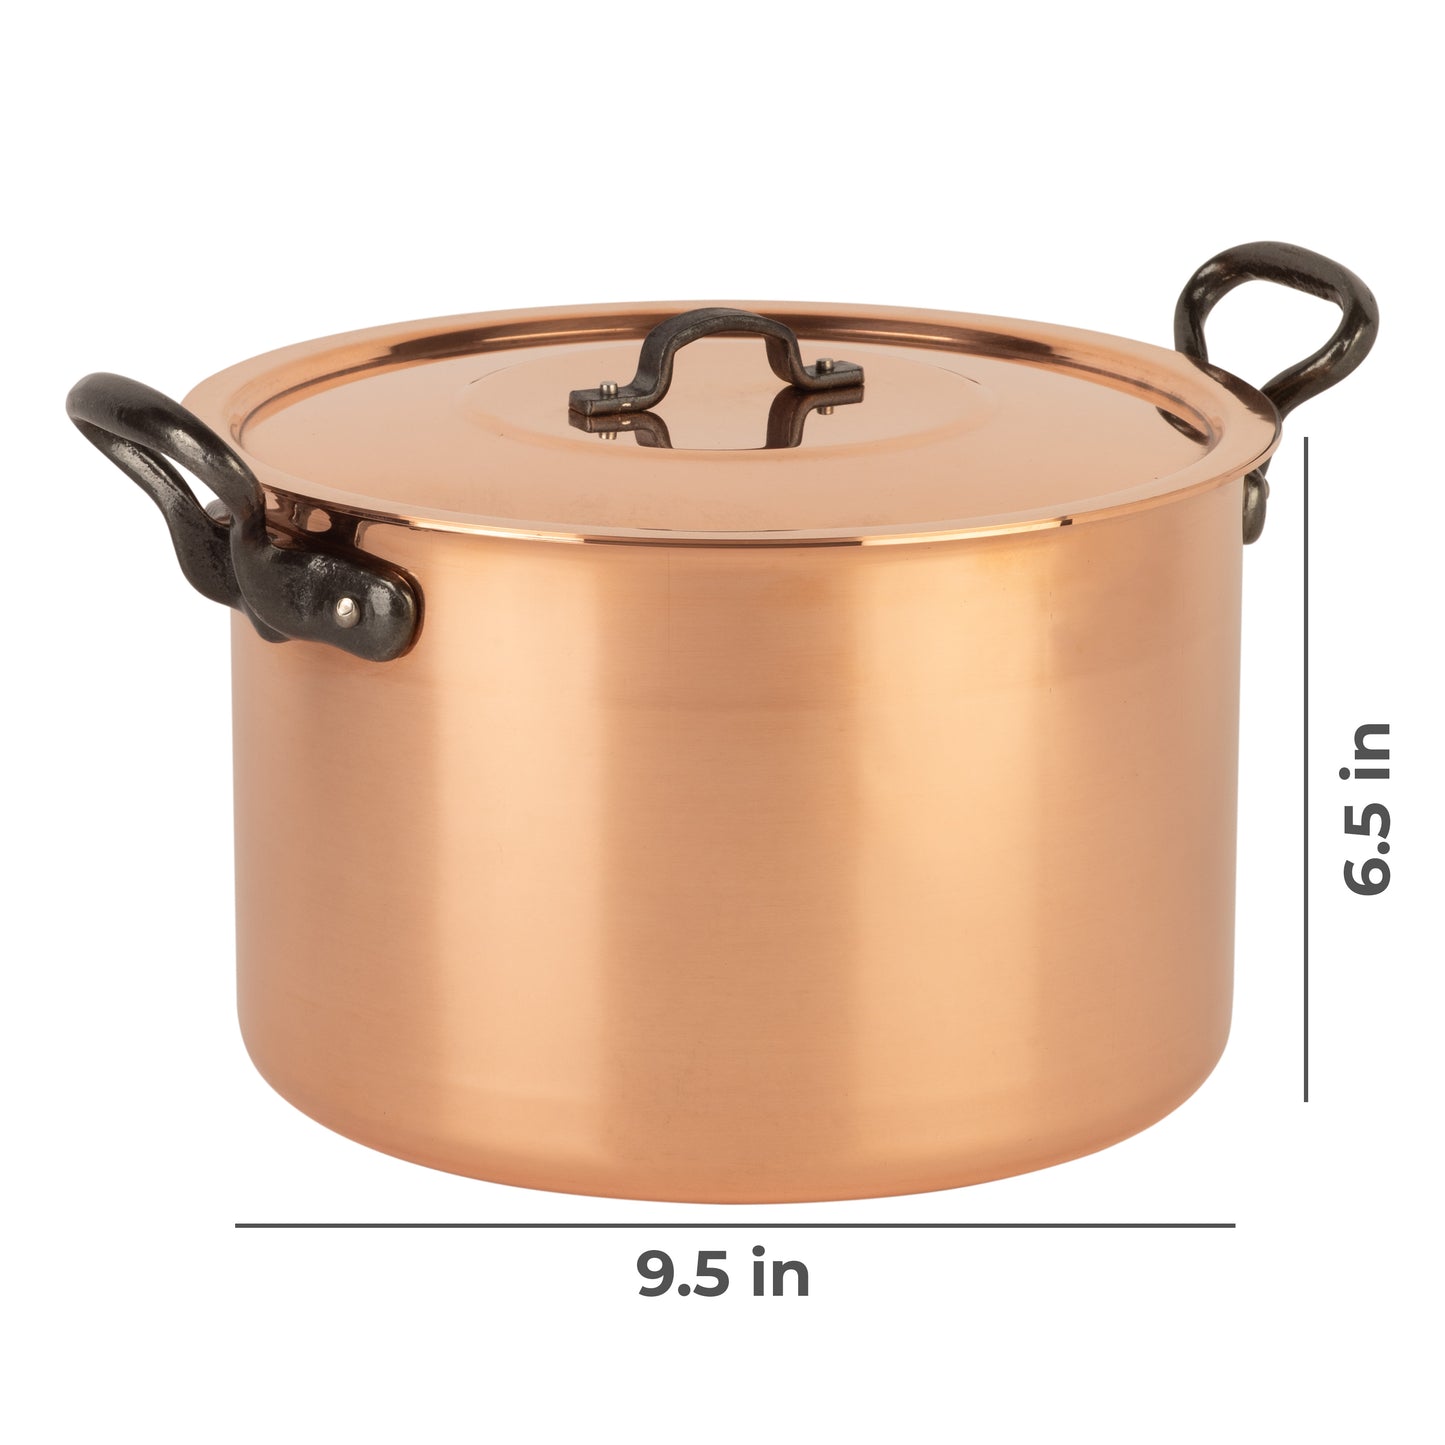 Tinned copper soup pot with higher walls, 6.3 qt